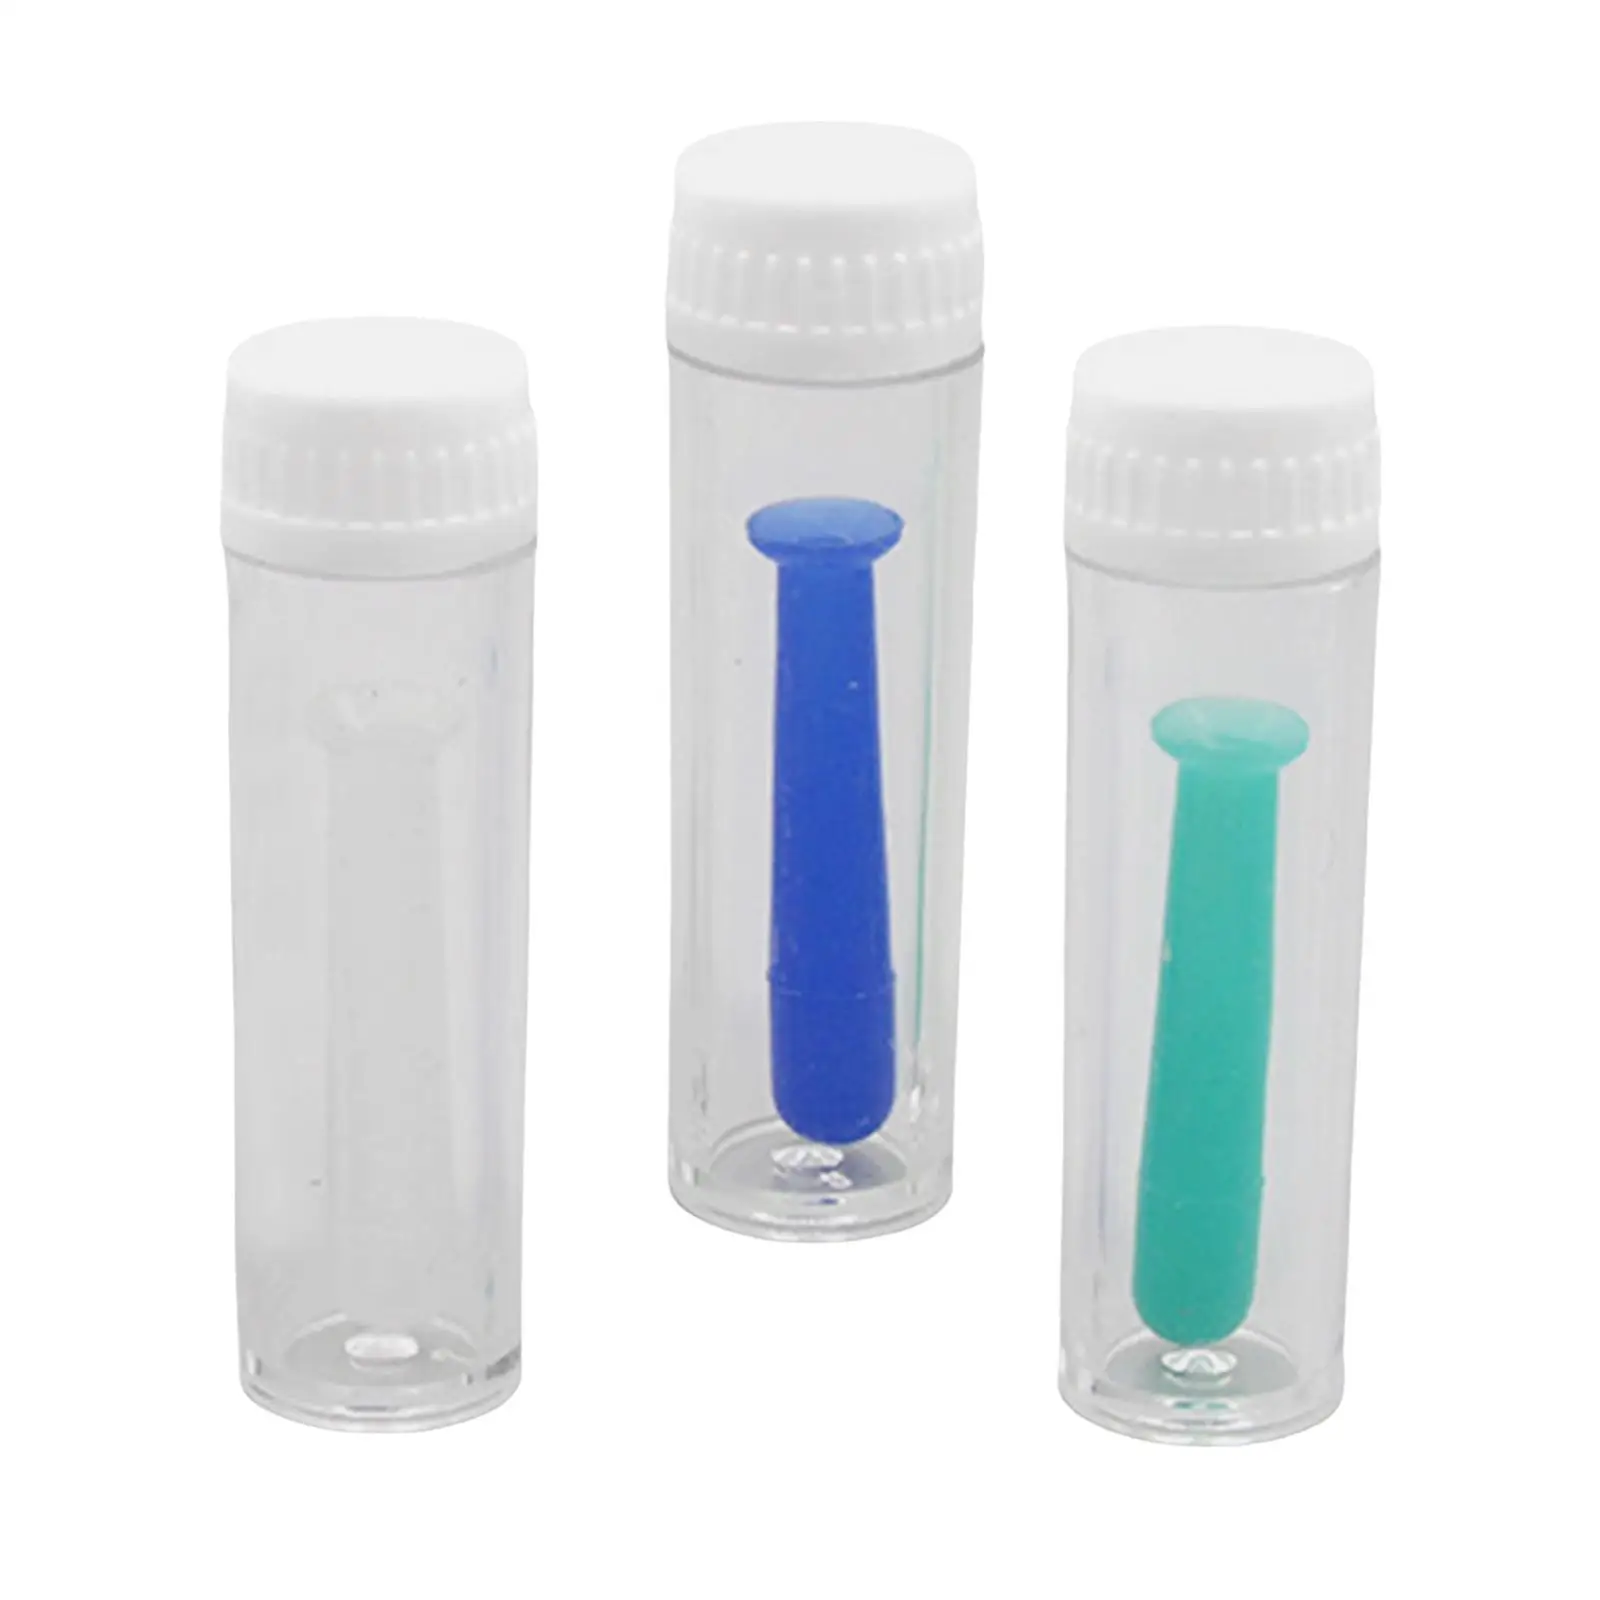 Silicone Contacts Inserter Remover Lightweight Portable with Storage Bottle Compact Soft Suction Cup Plunger for Rgp Lenses